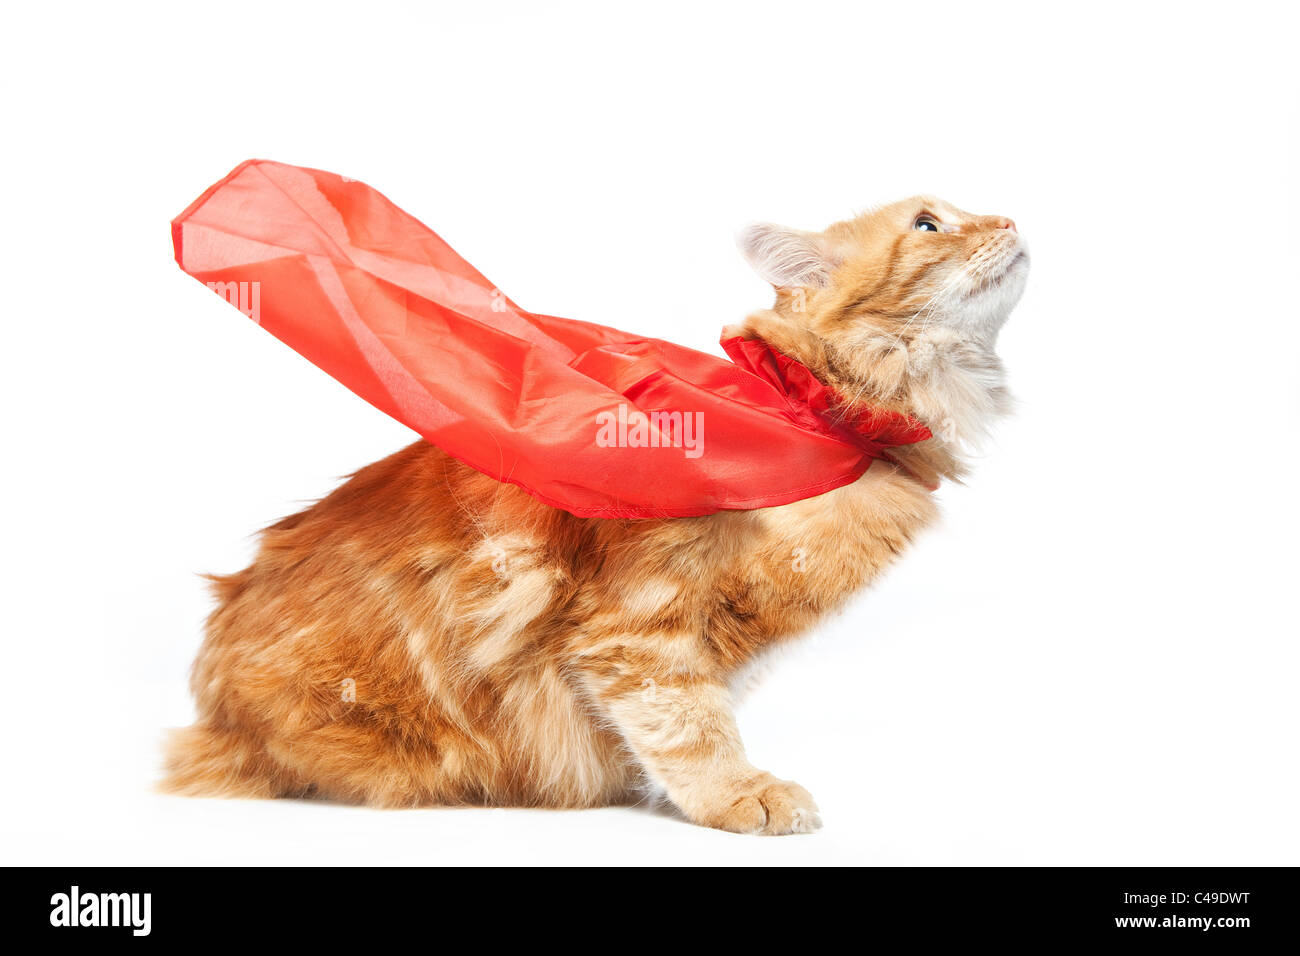 Orange red Manx cat wearing a red flowing superhero cape and looking up like he's going to take flight. Stock Photo